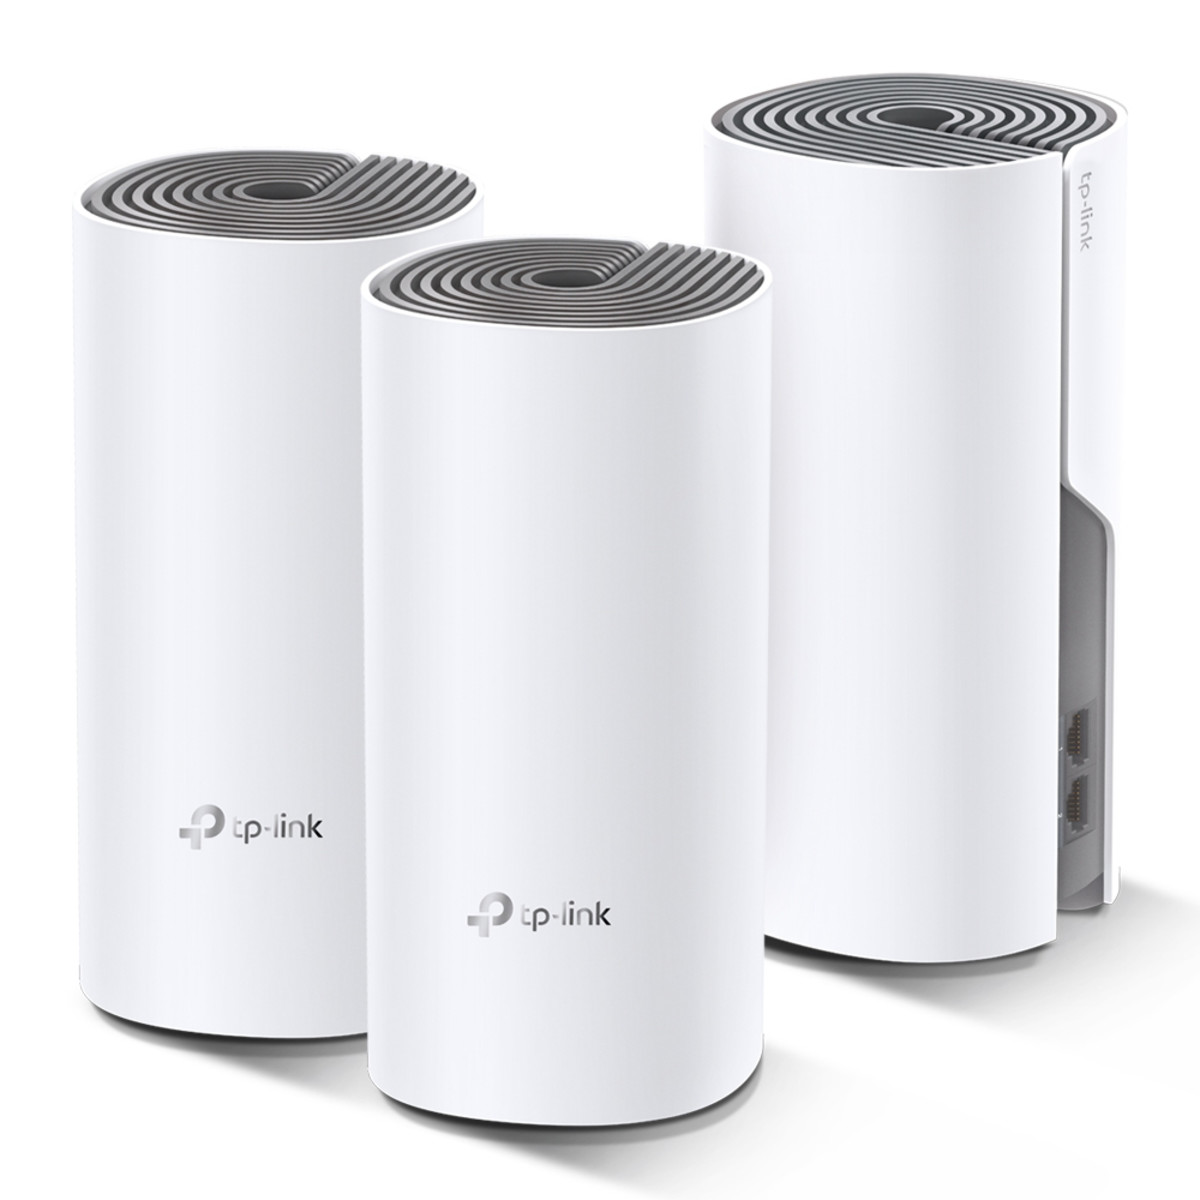 AC1200 Whole-Home Mesh Wi-Fi (3-pack)